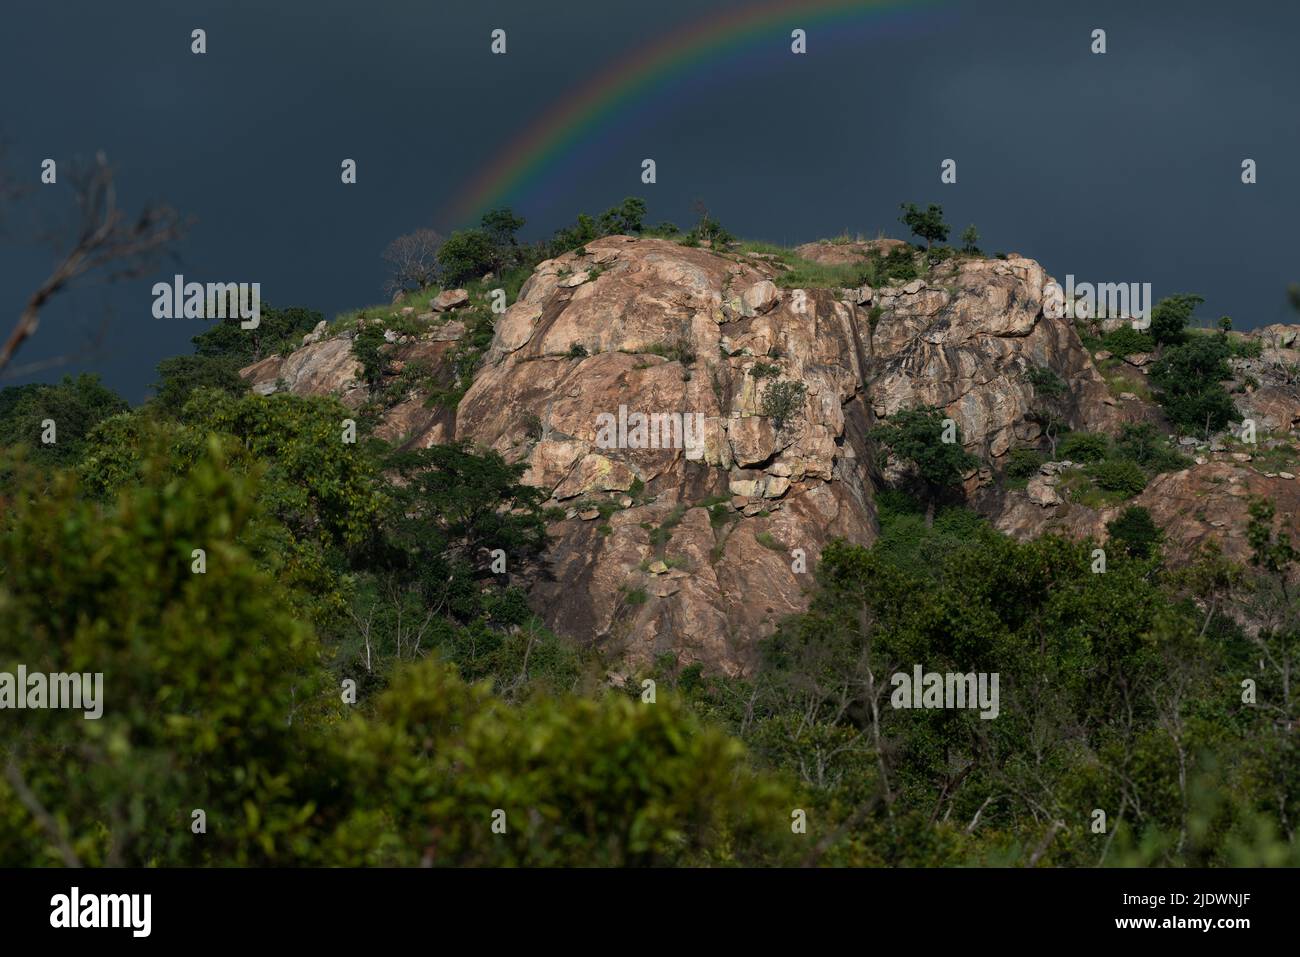 Rainbow behind a rocky outcrop in the Kruger National Park Stock Photo